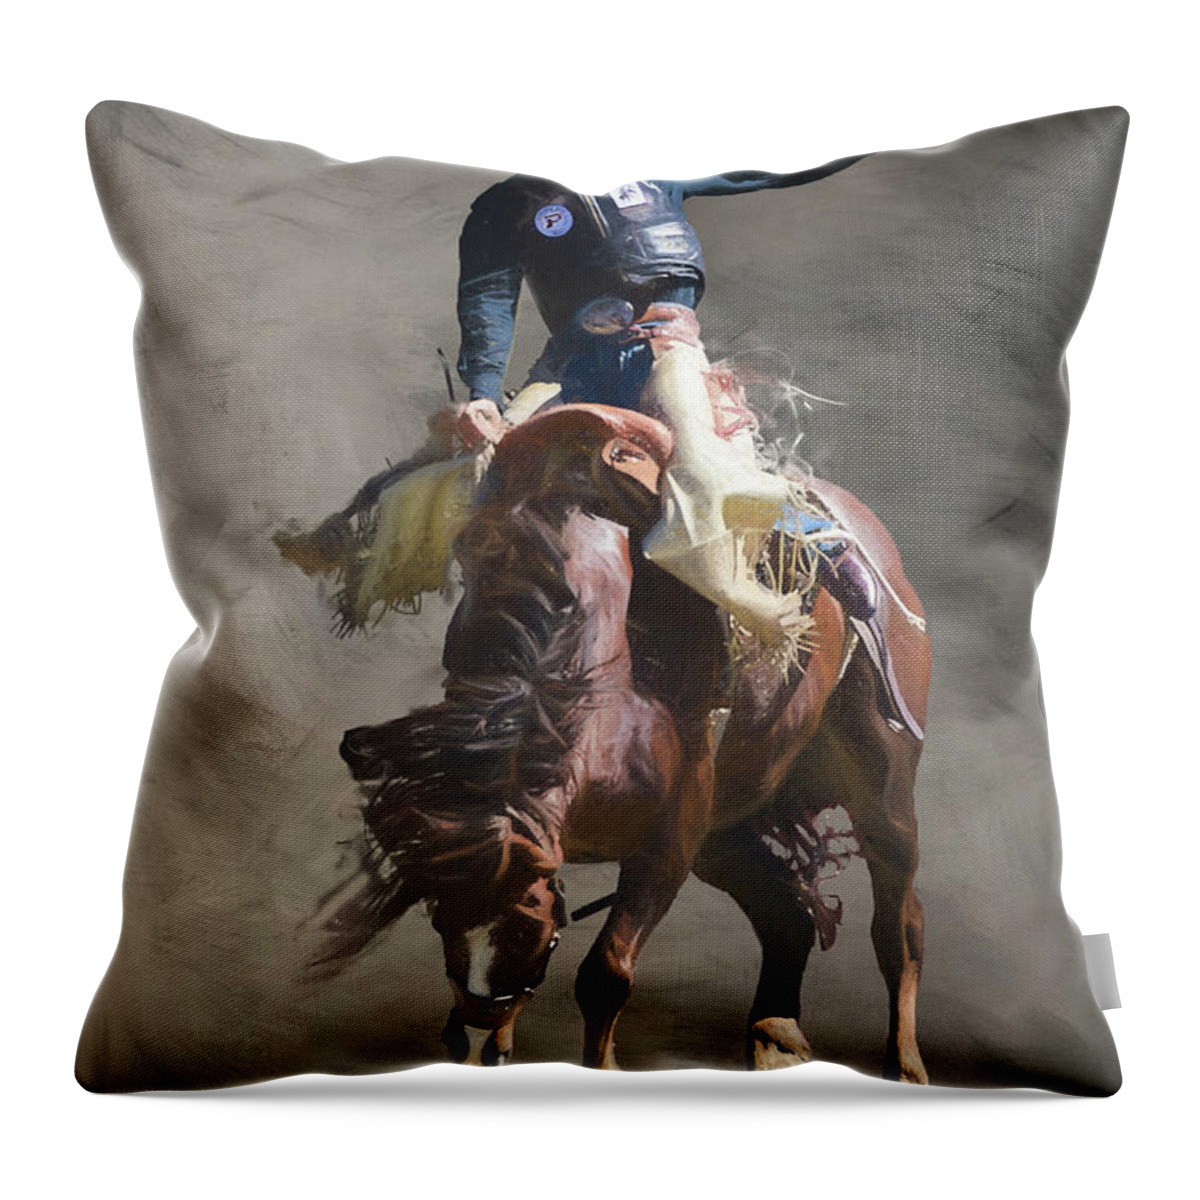 Cowboy Throw Pillow featuring the digital art Poetry in Motion by Jim Hatch